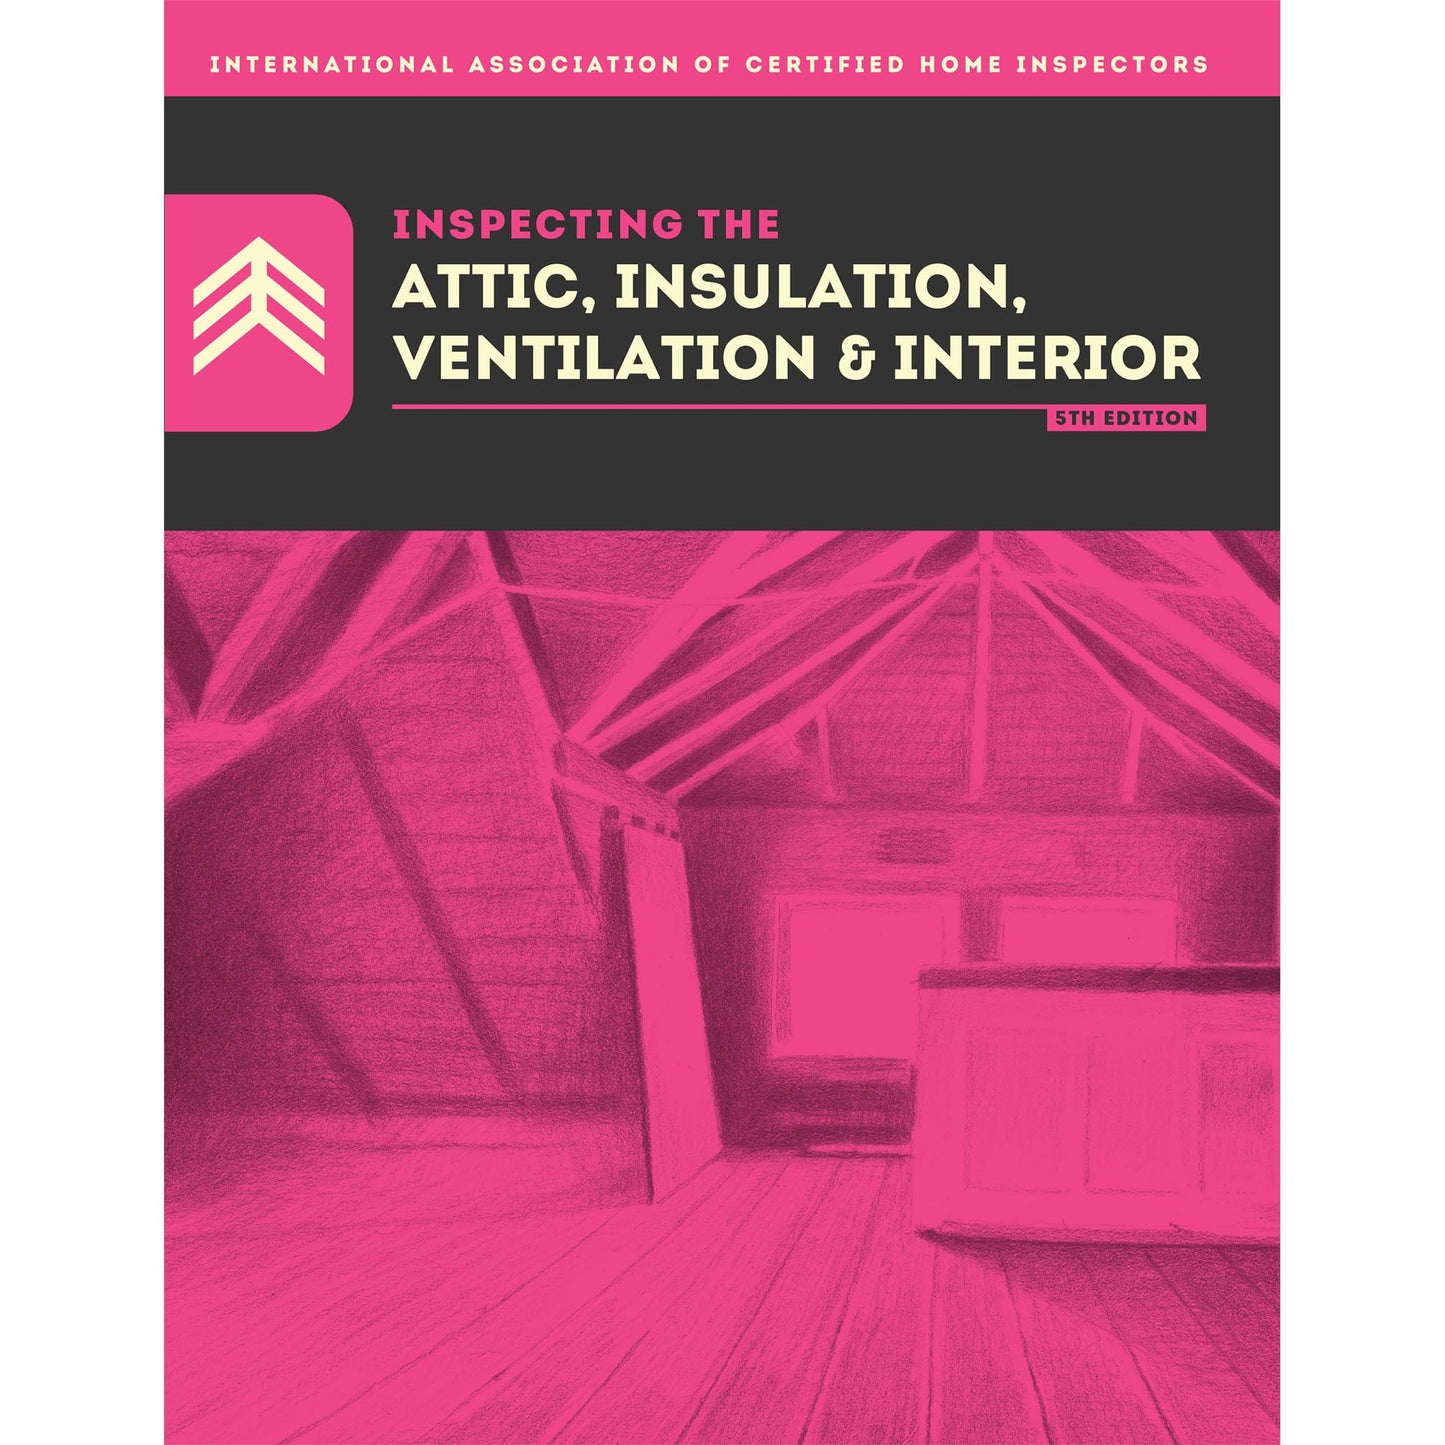 Inspecting the Attic, Insulation, Ventilation and Interior PDF Download